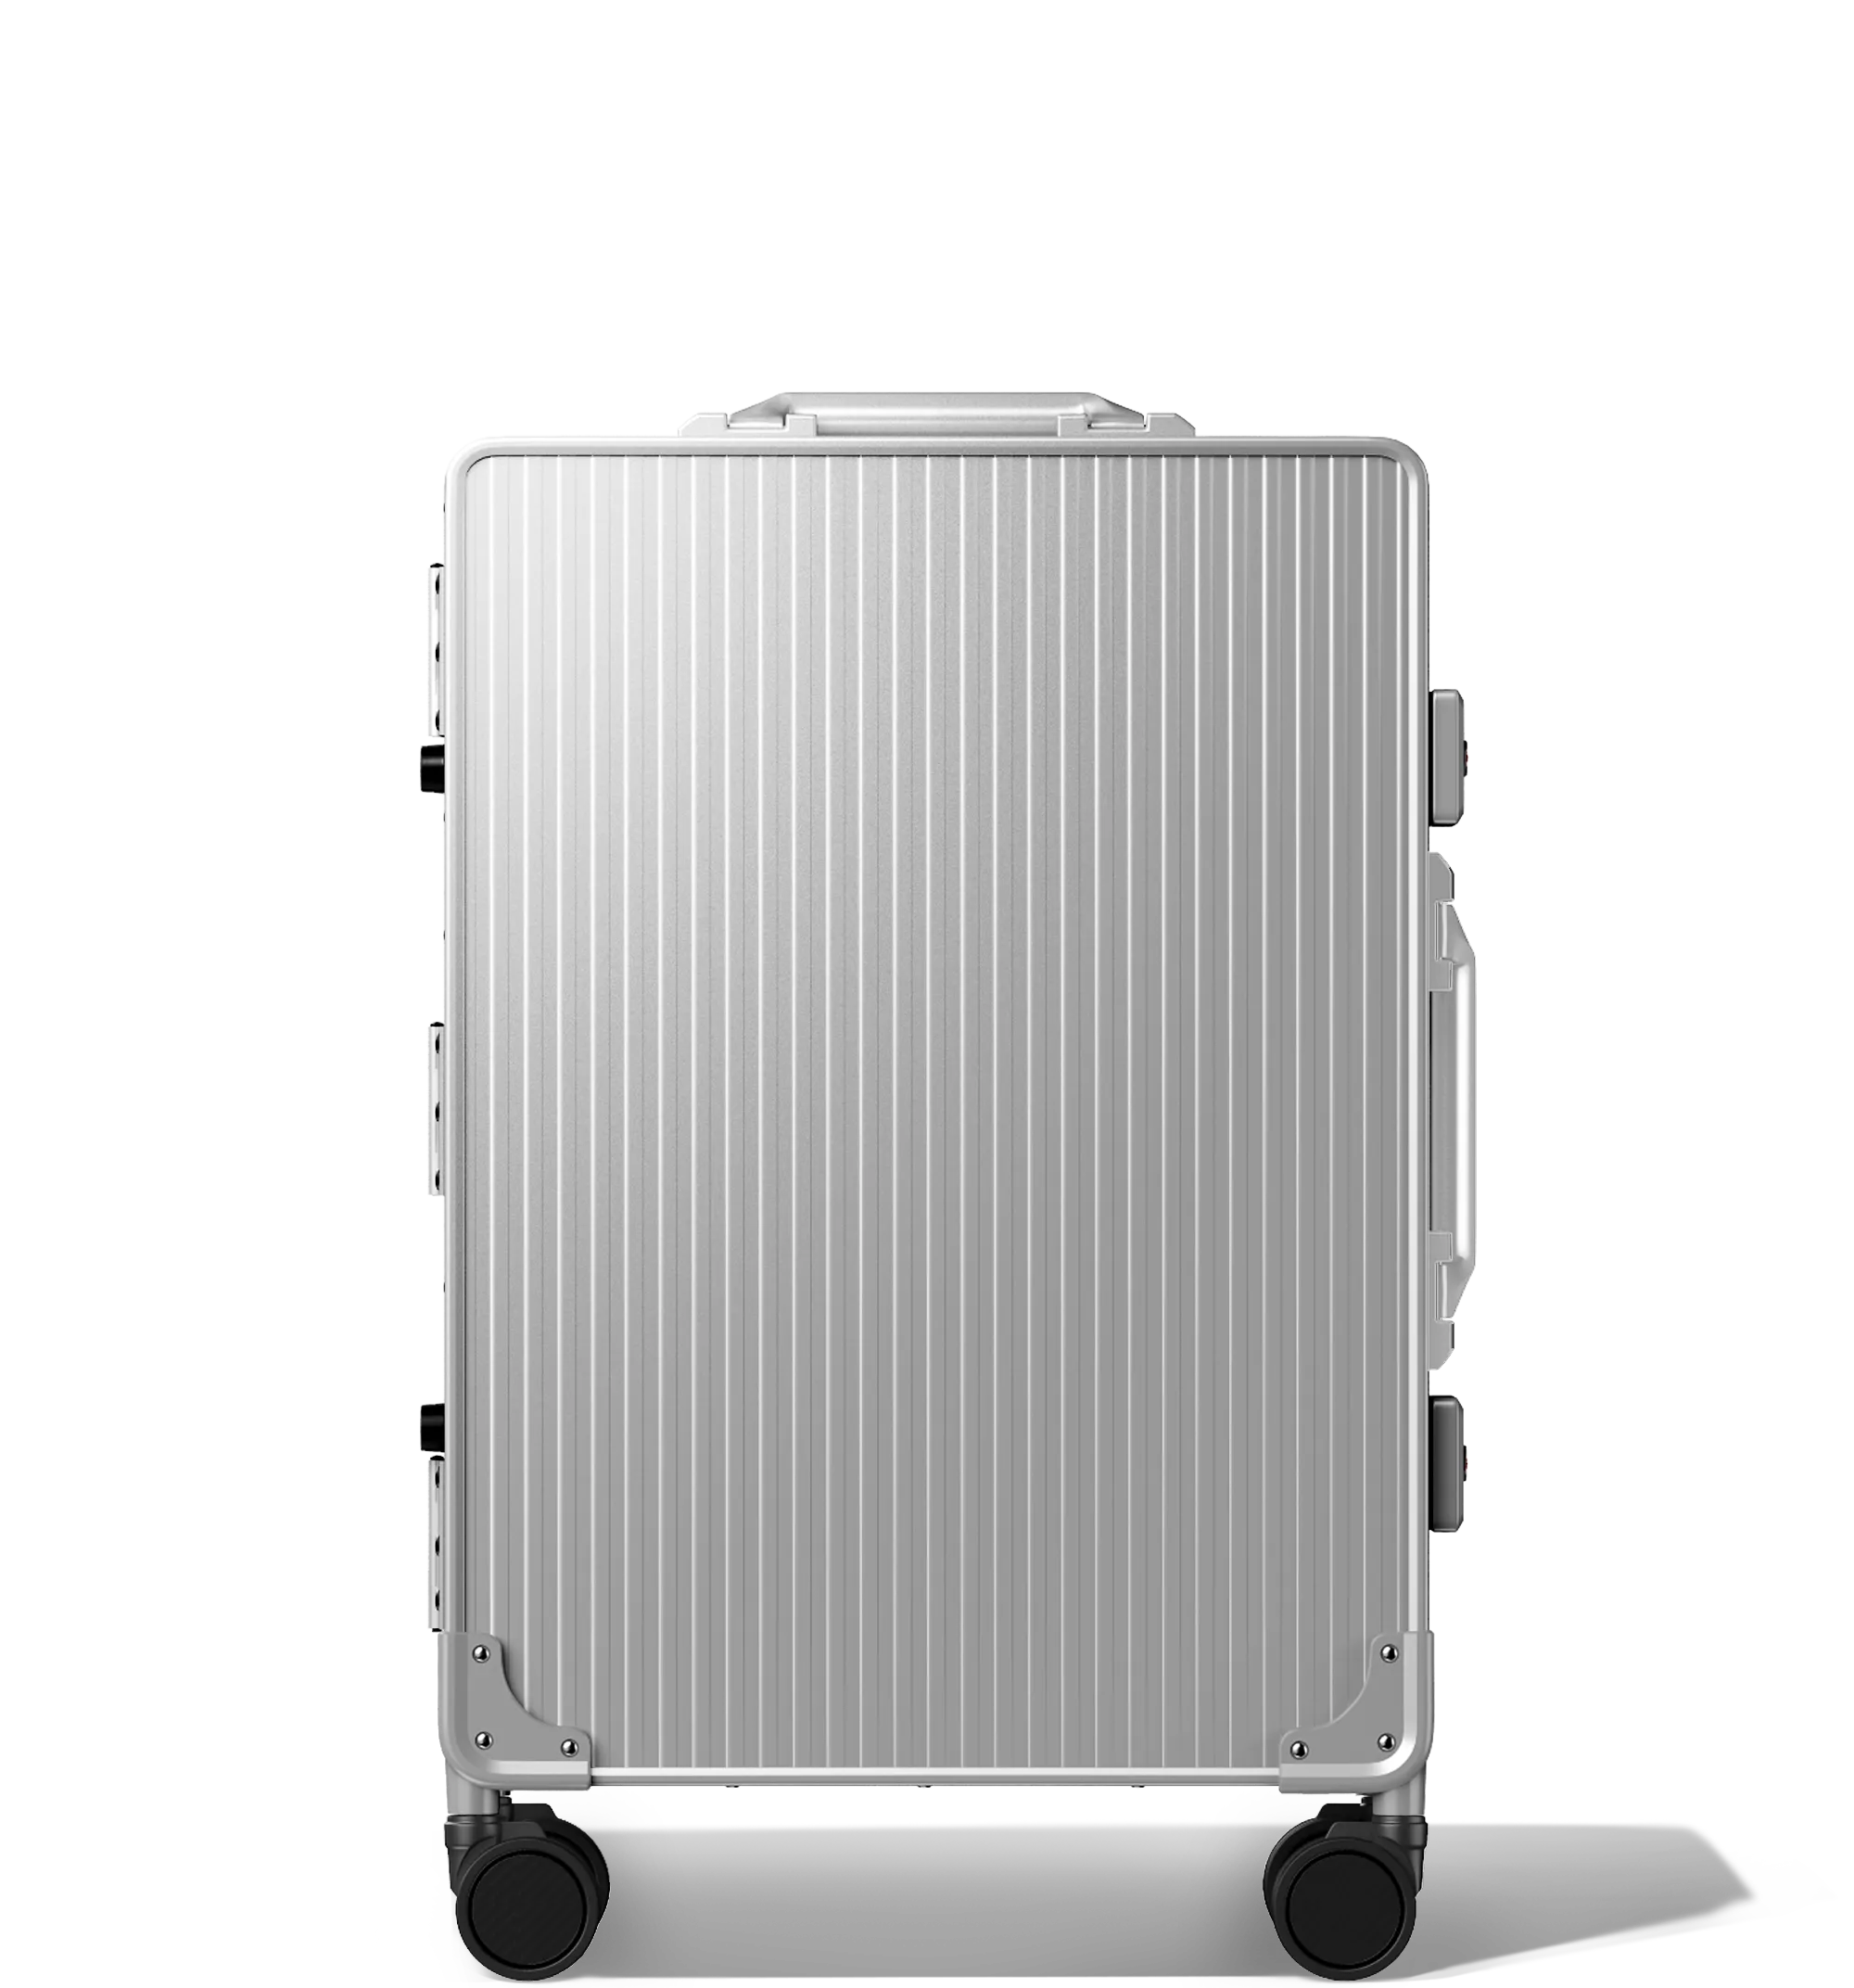 A vertical image of a Cabin in 56/20 luggage , upright, Silver hard-shell aluminium Luggage with a grooved surface design and multi-directional wheels, shown against a white background.